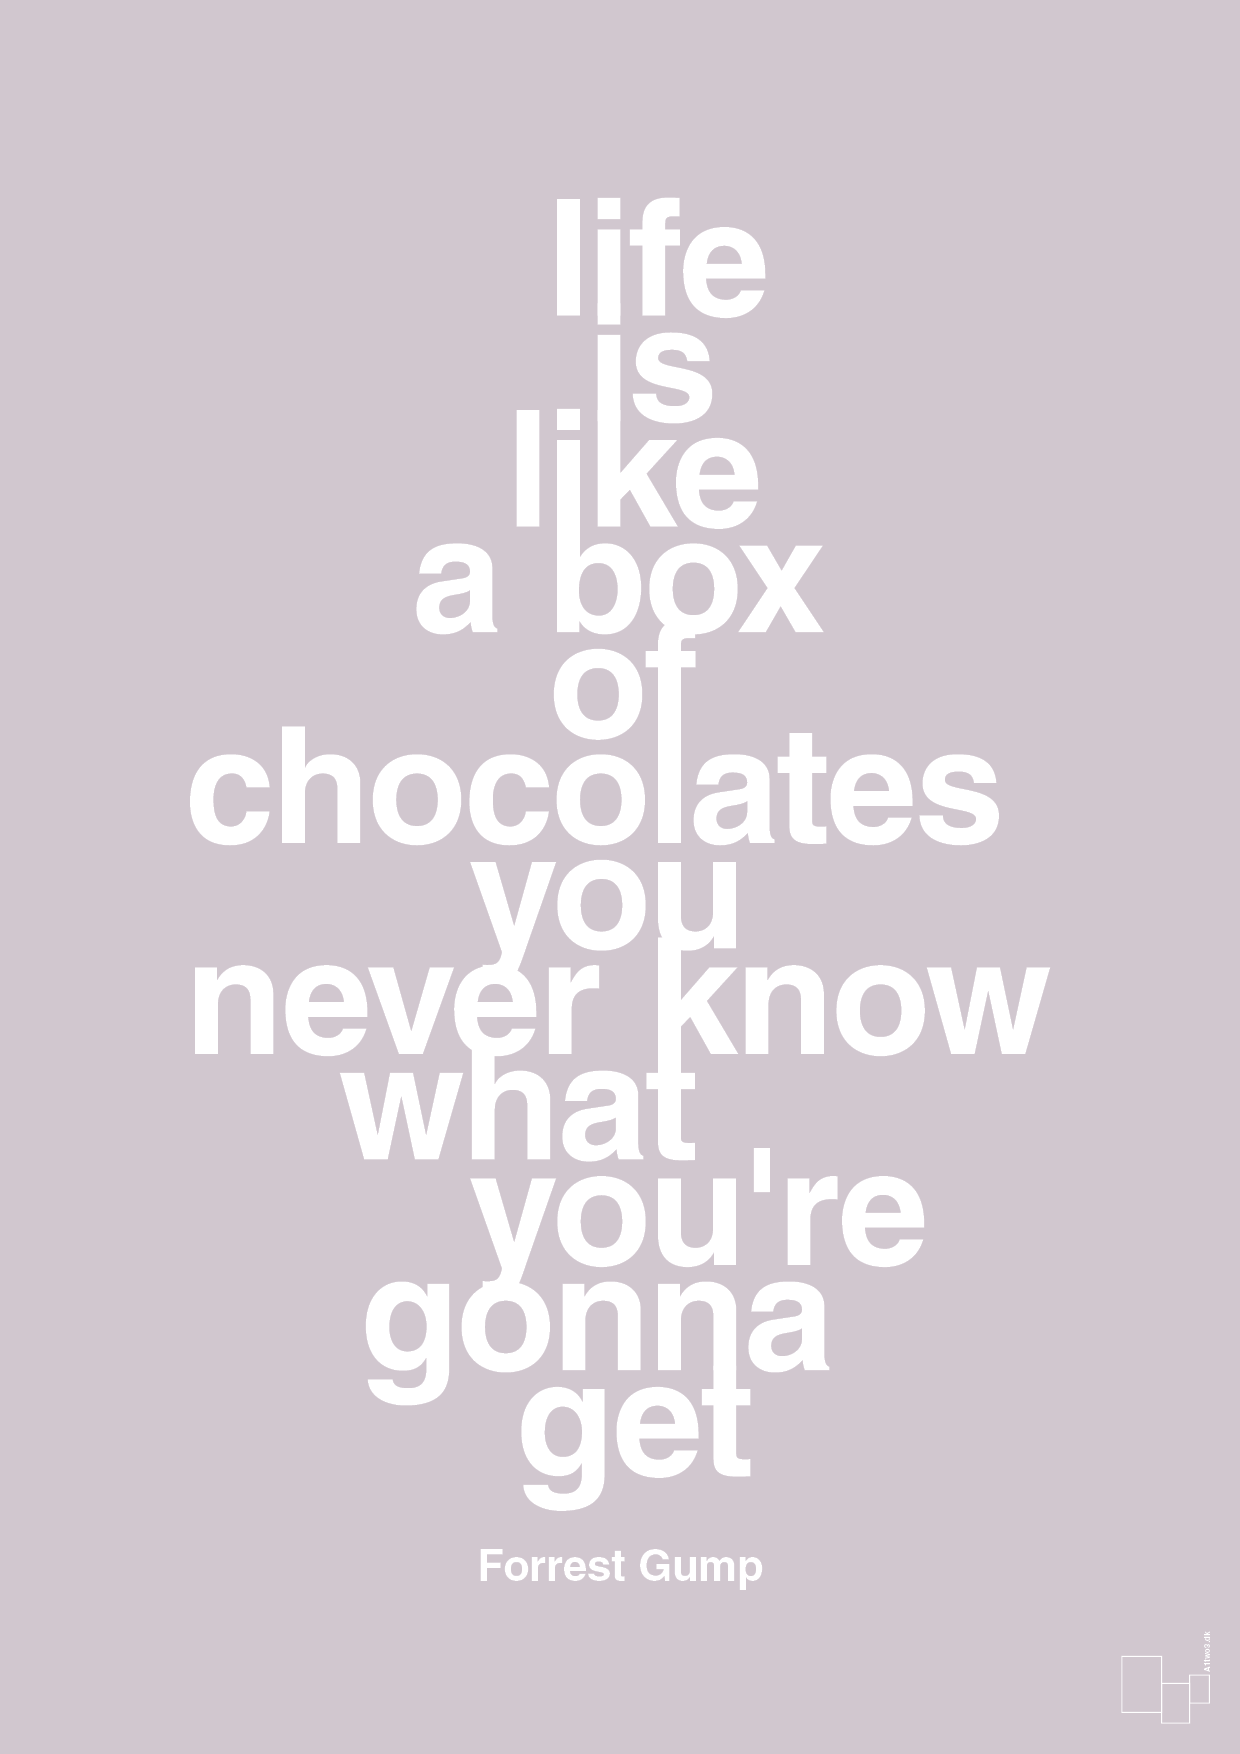 life is like a box of chocolates you never know what you're gonna get - Plakat med Citater i Dusty Lilac